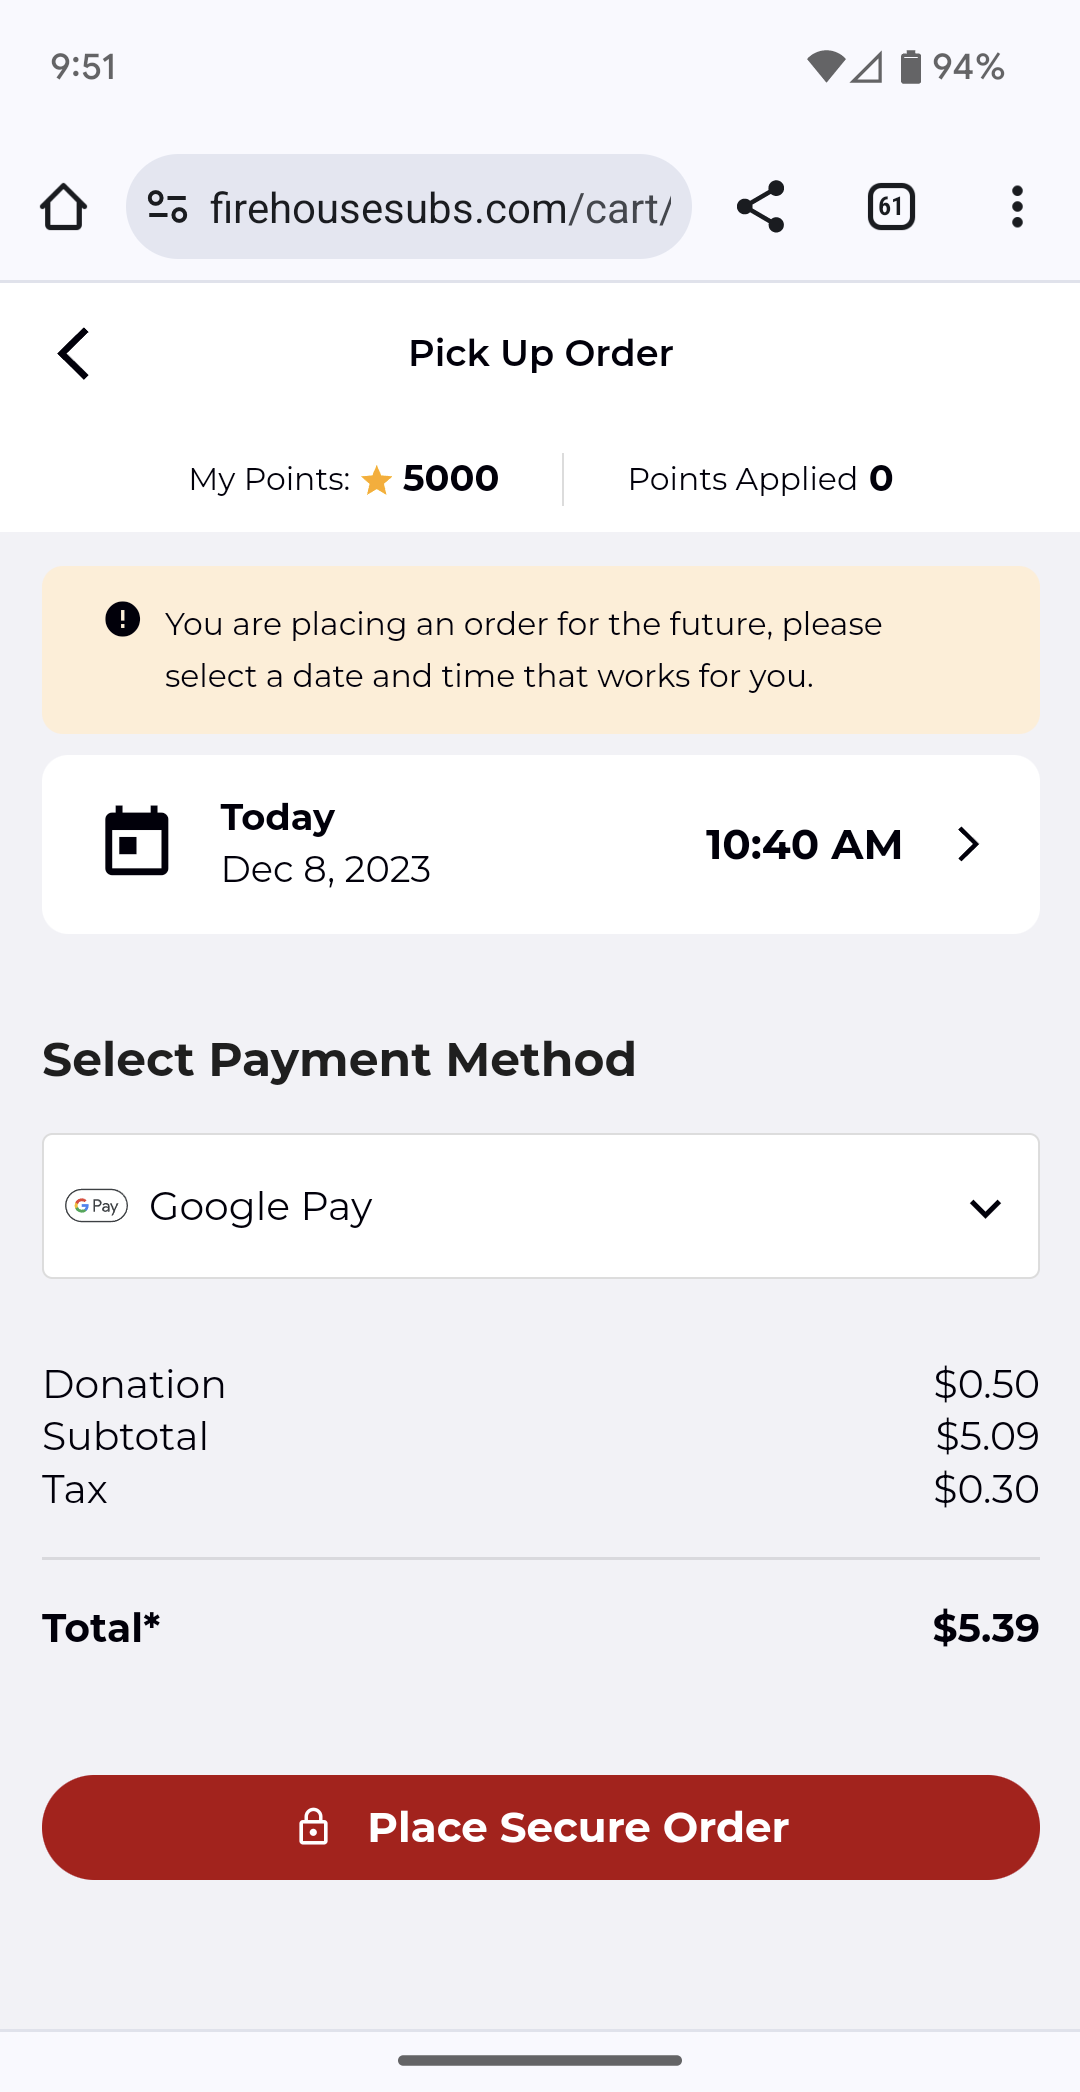 Firehouse Subs accepts Google Pay on its website.